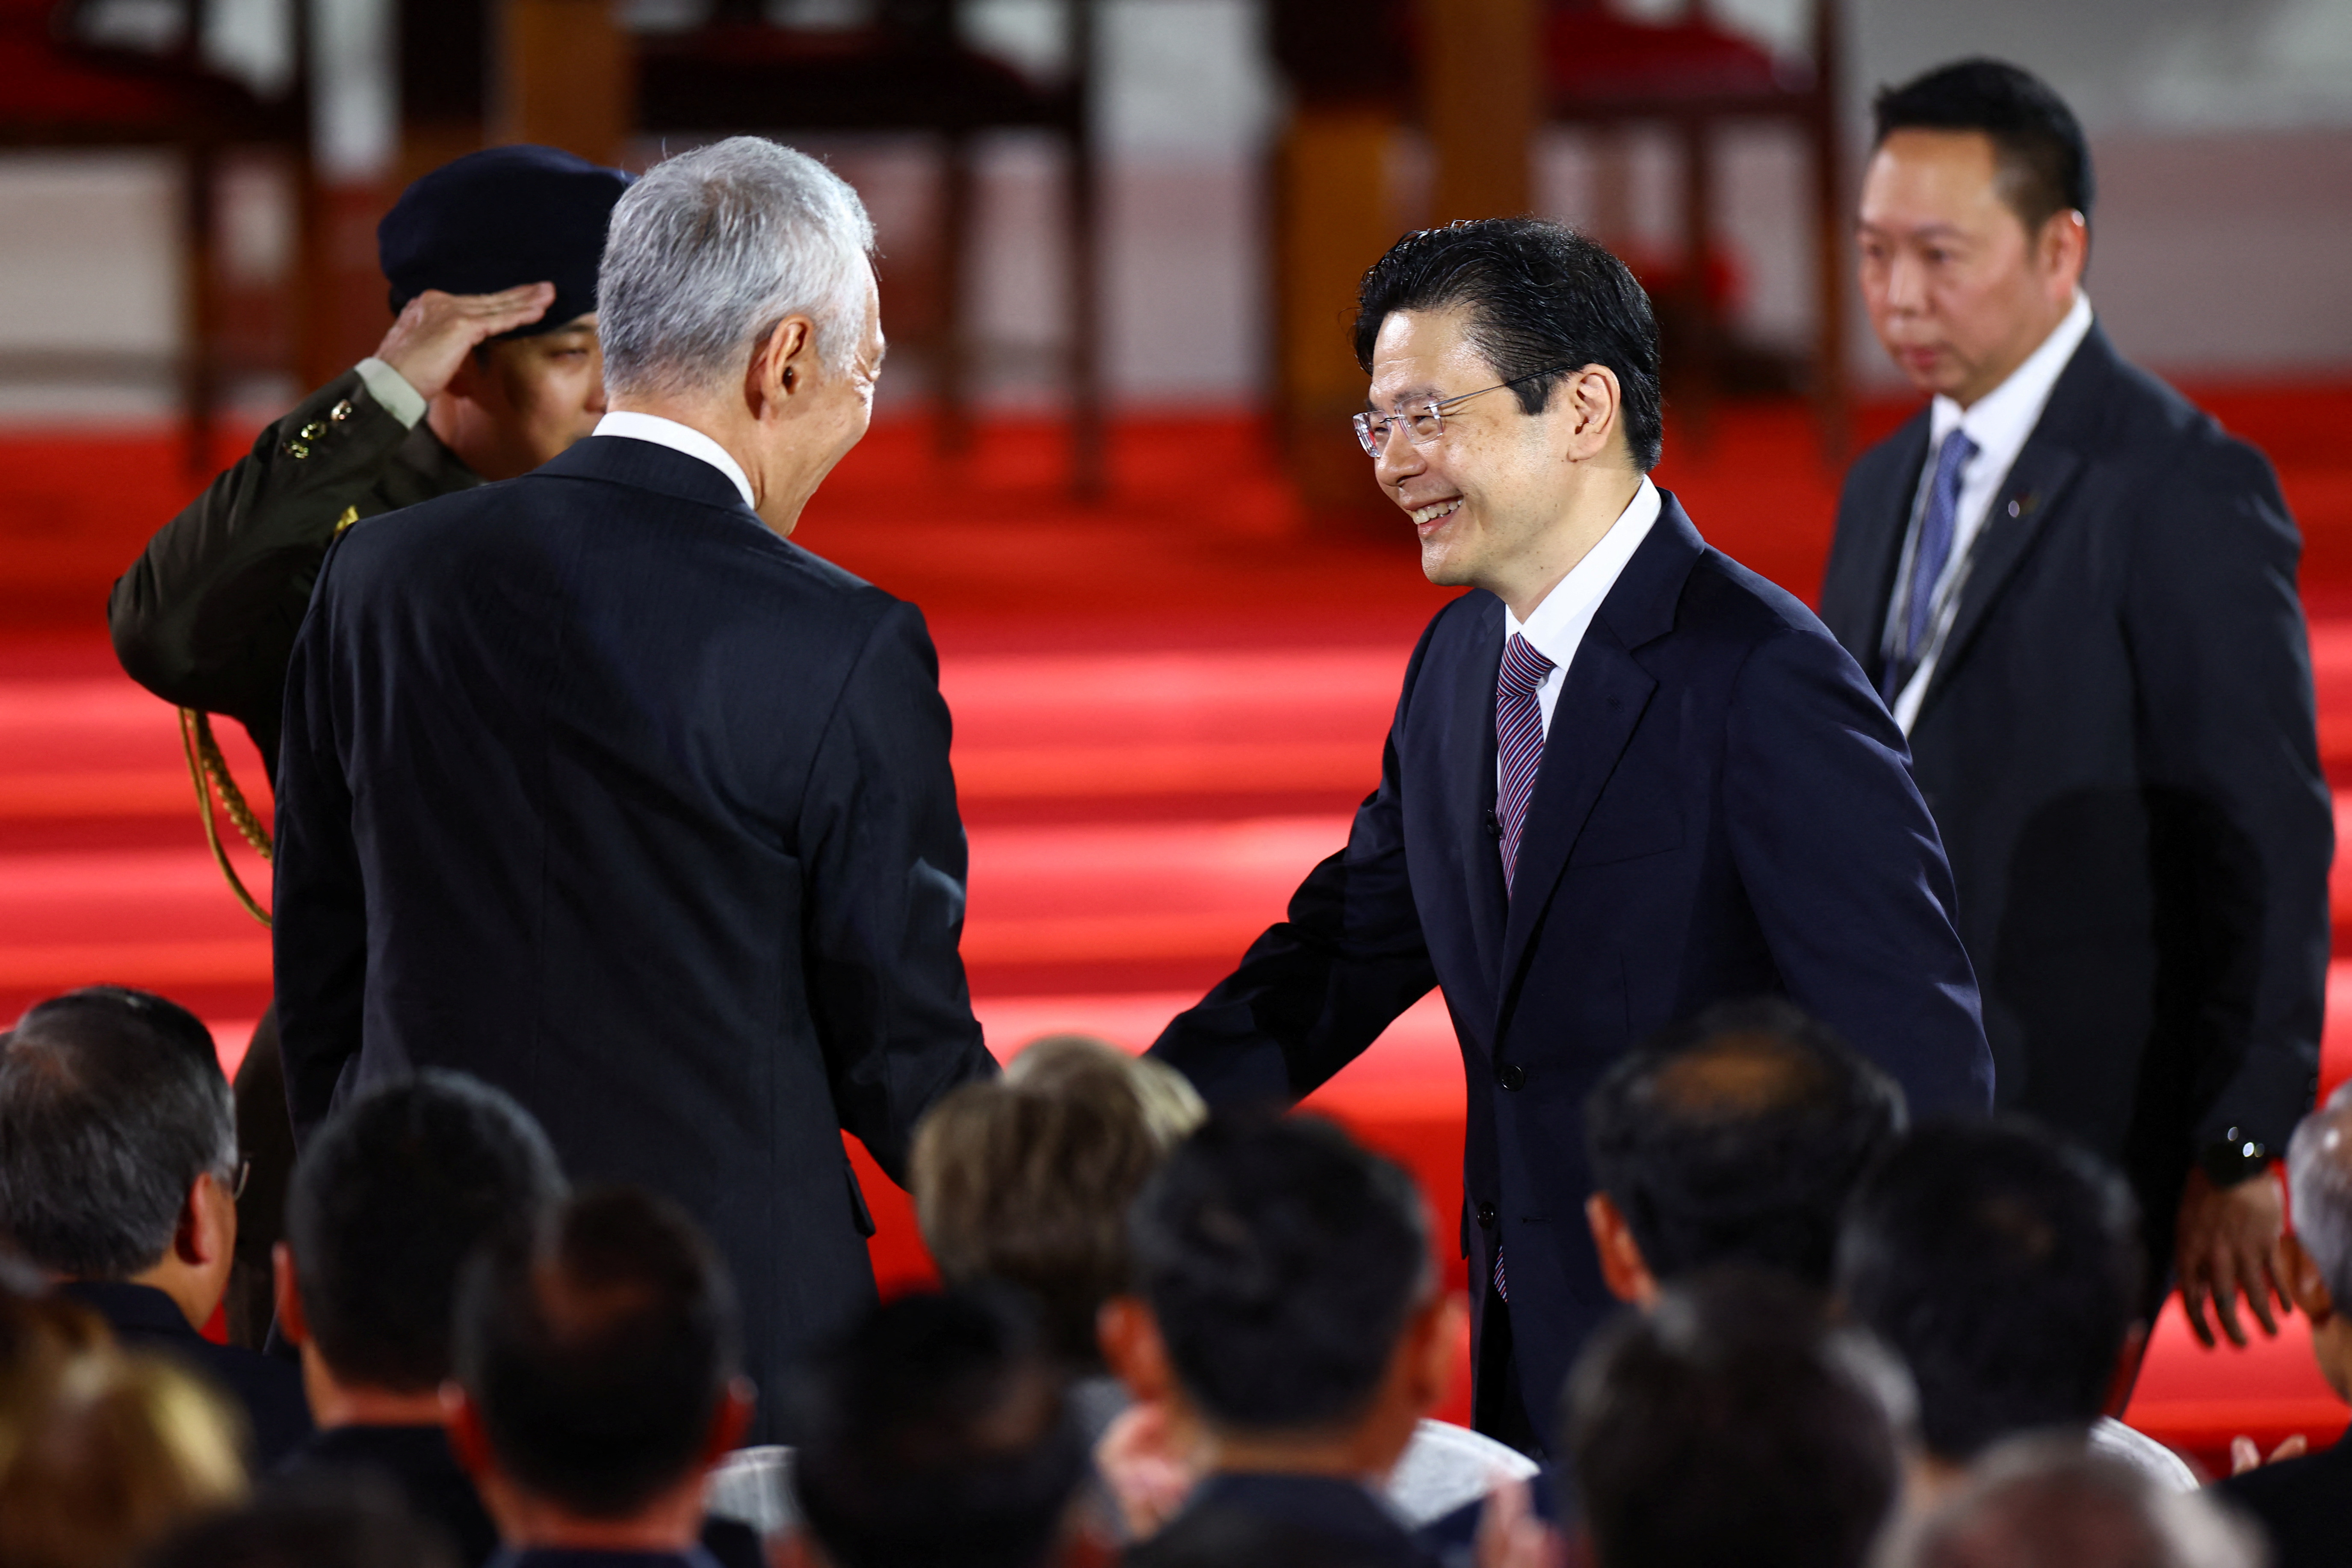 Singapore's Deputy Prime Minister and Minister of Finance Lawrence Wong is sworn in as Singapore's fourth Prime Minister